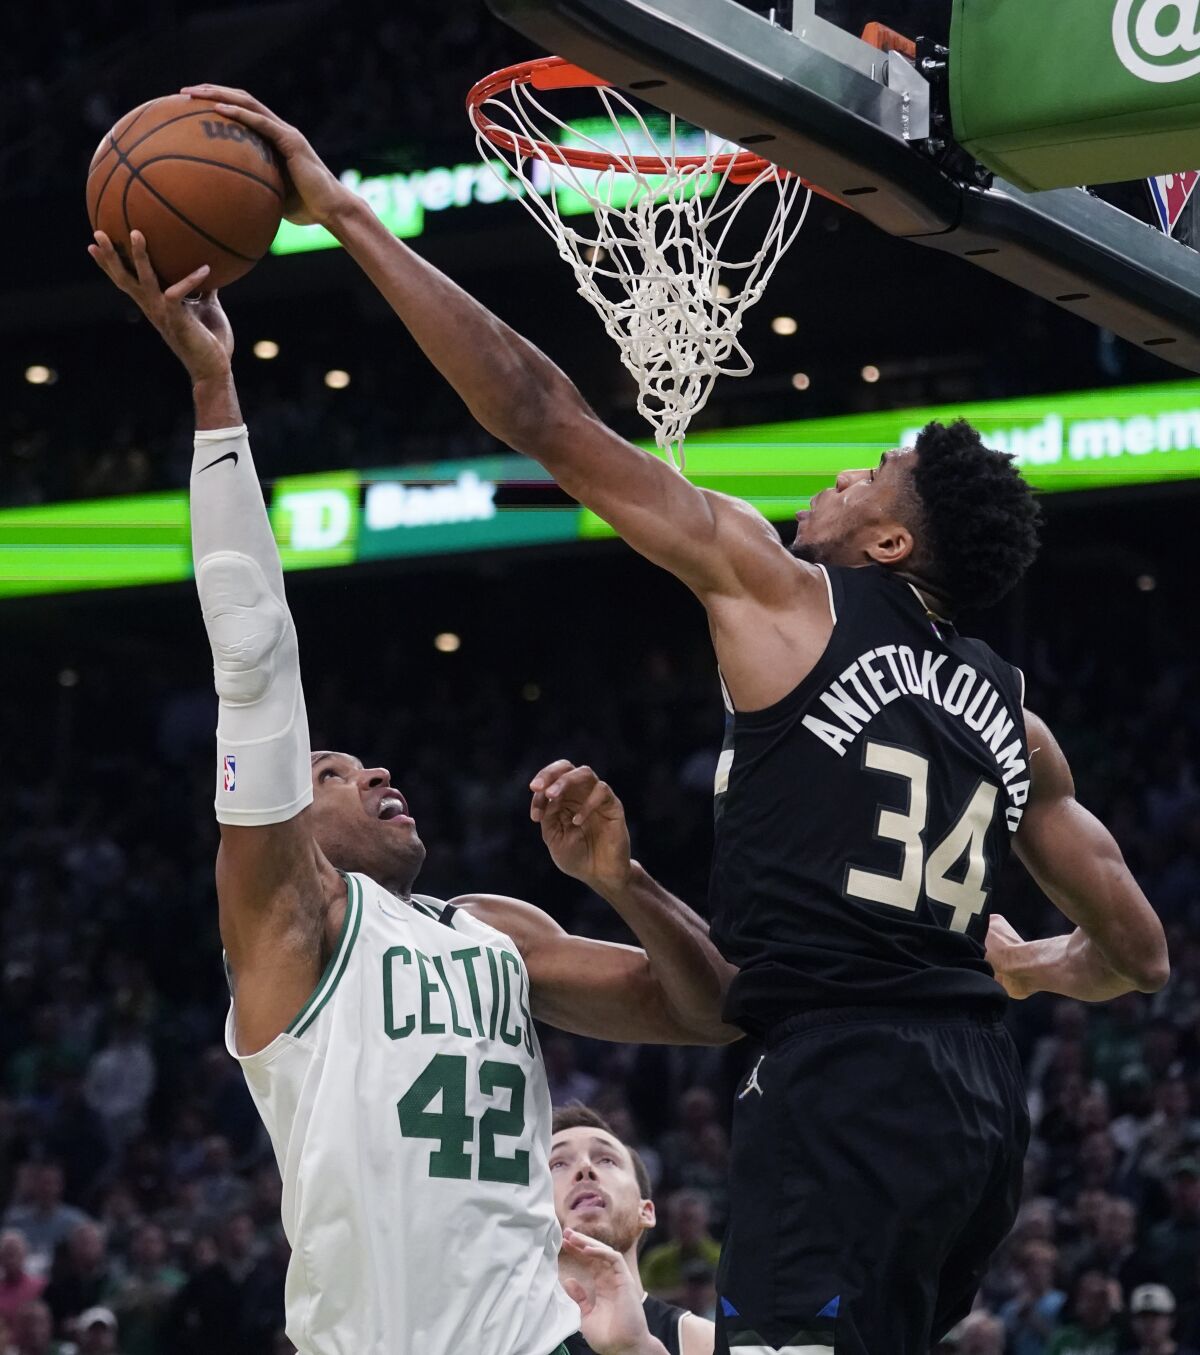 Milwaukee Bucks forward Giannis Antetokounmpo (34) blocks a shot by Boston Celtics center Al Horford (42) during the second half of Game 5 of an Eastern Conference semifinal in the NBA basketball playoffs, Wednesday, May 11, 2022, in Boston. The Bucks won 110-107. (AP Photo/Charles Krupa)